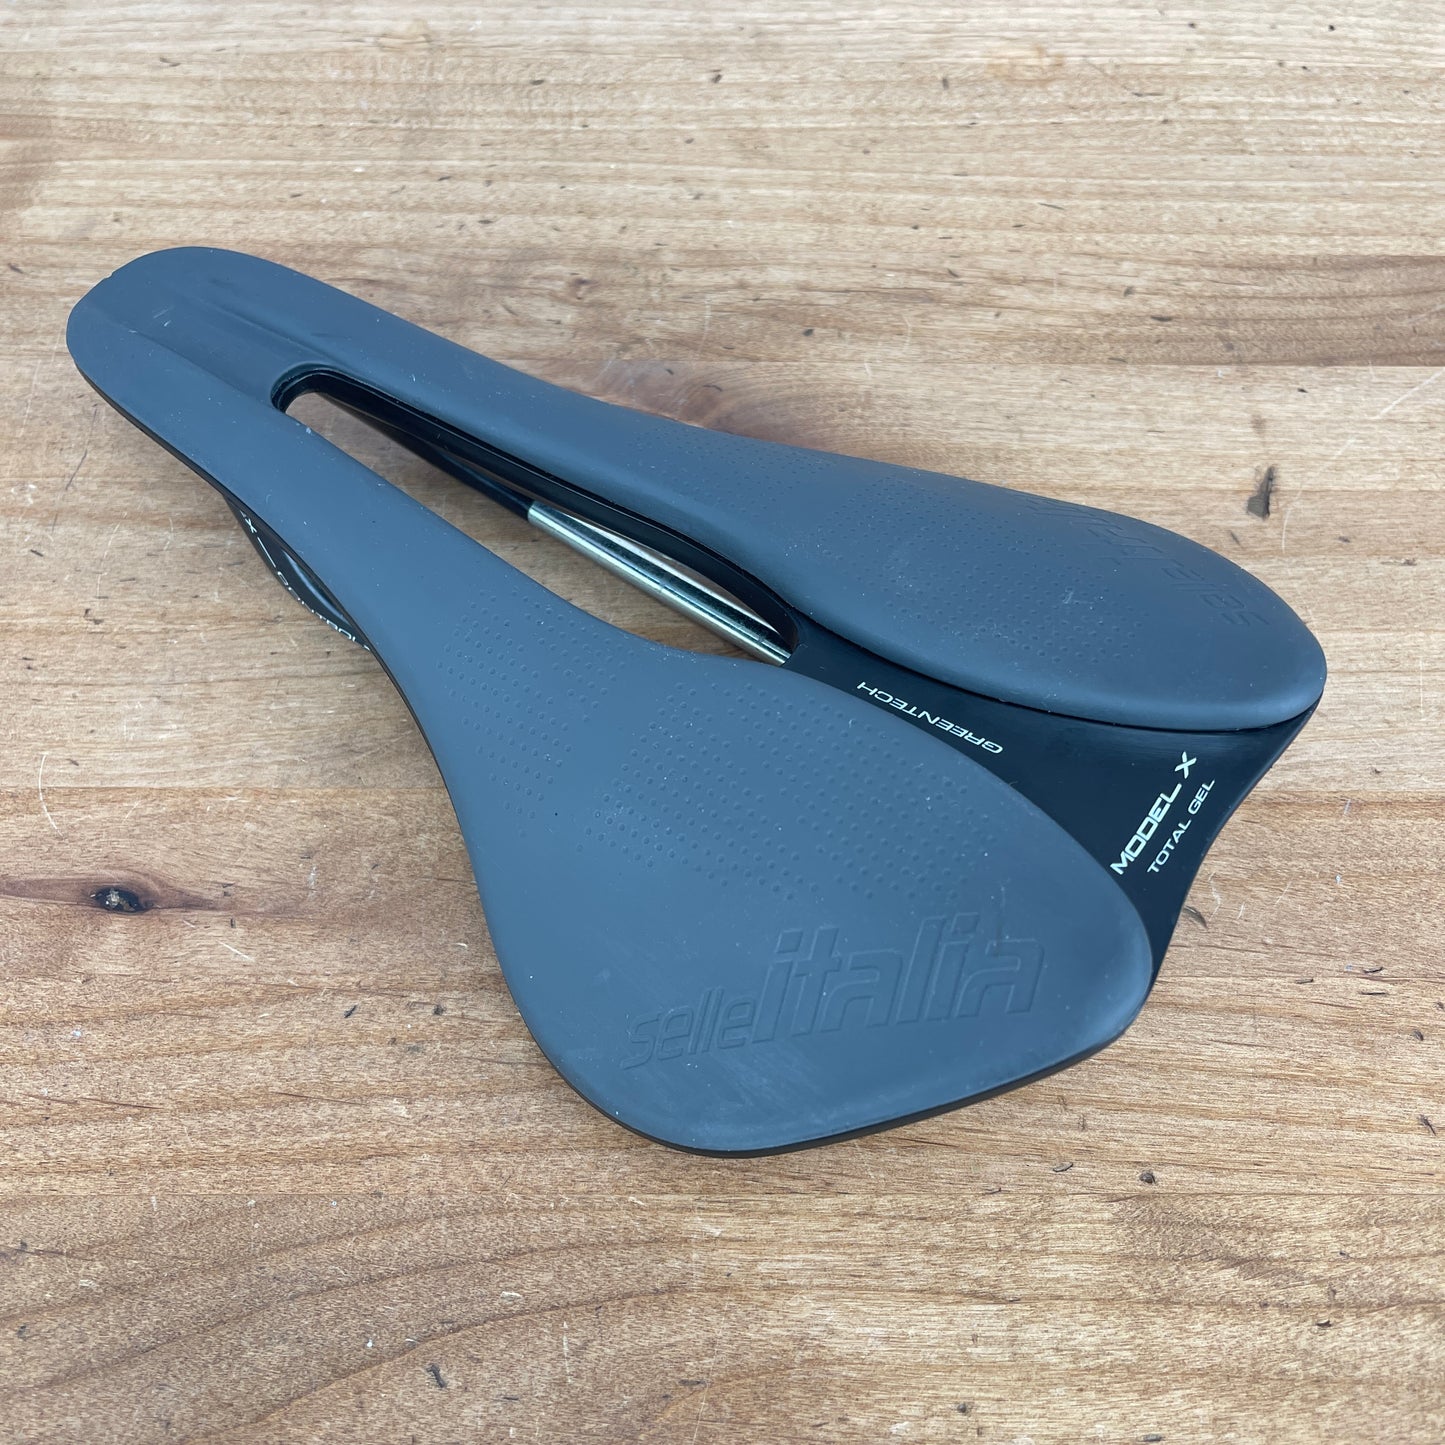 Selle Italia Boost Model X Total Gel  7x7mm Alloy Rails 145mm Bicycle Saddle 315g